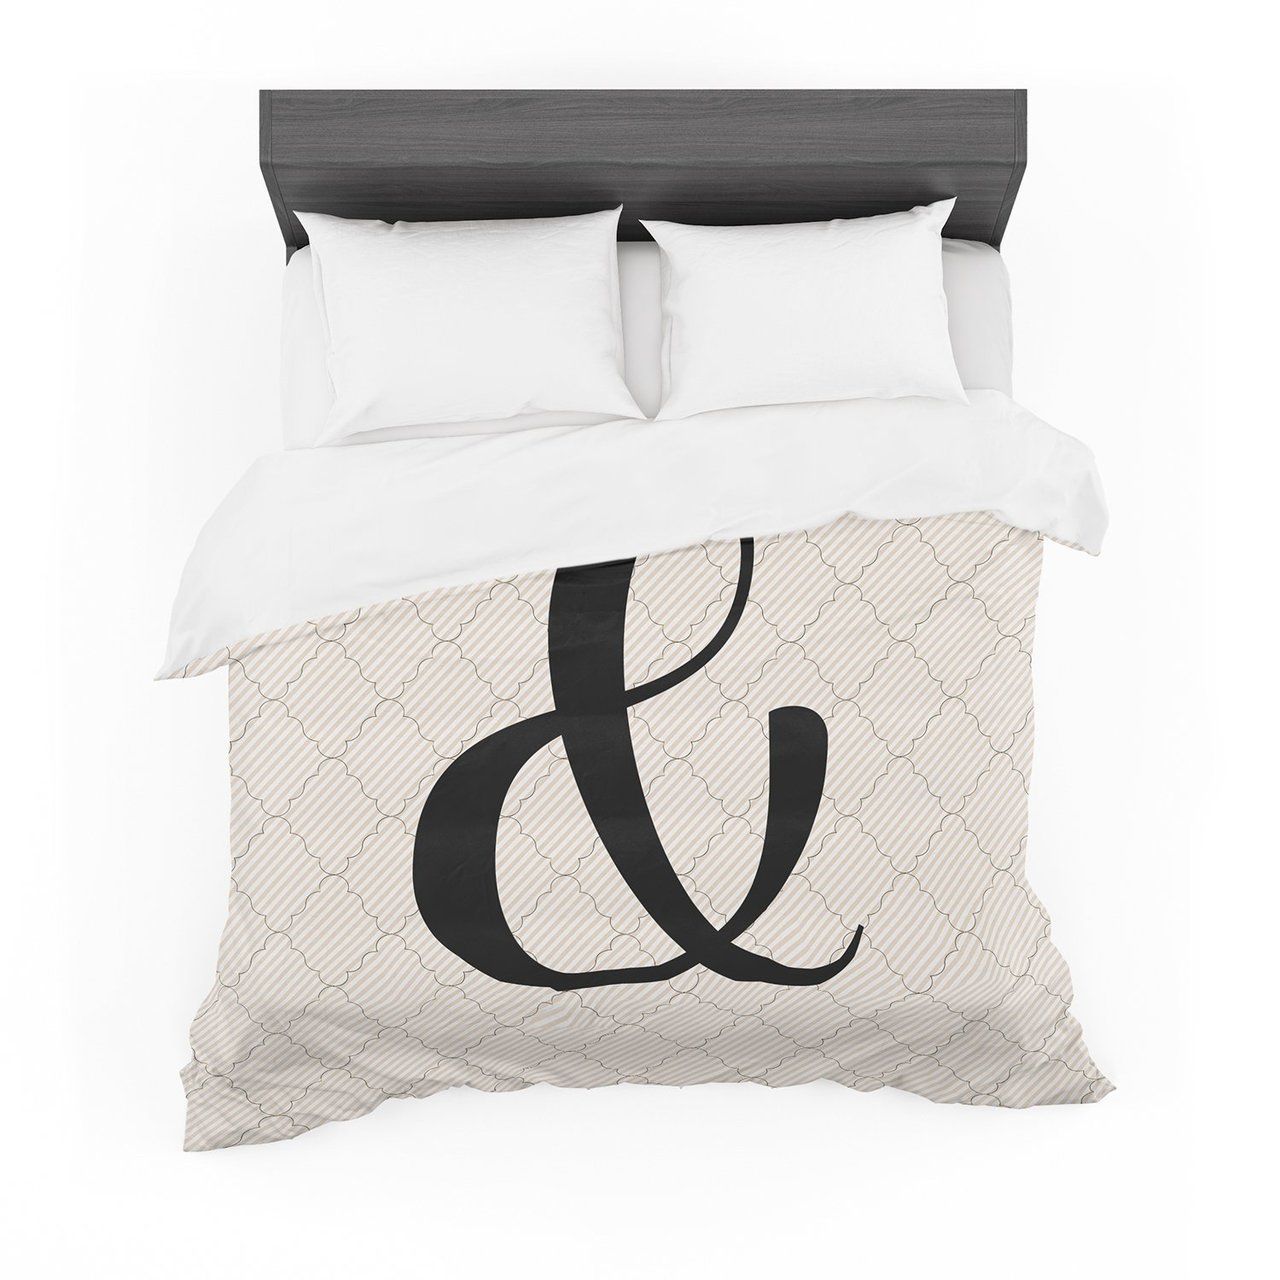 Best May Bedding Sets in Dreamartcanada Top 10 Picks for a Dreamy Bedroom Makeover